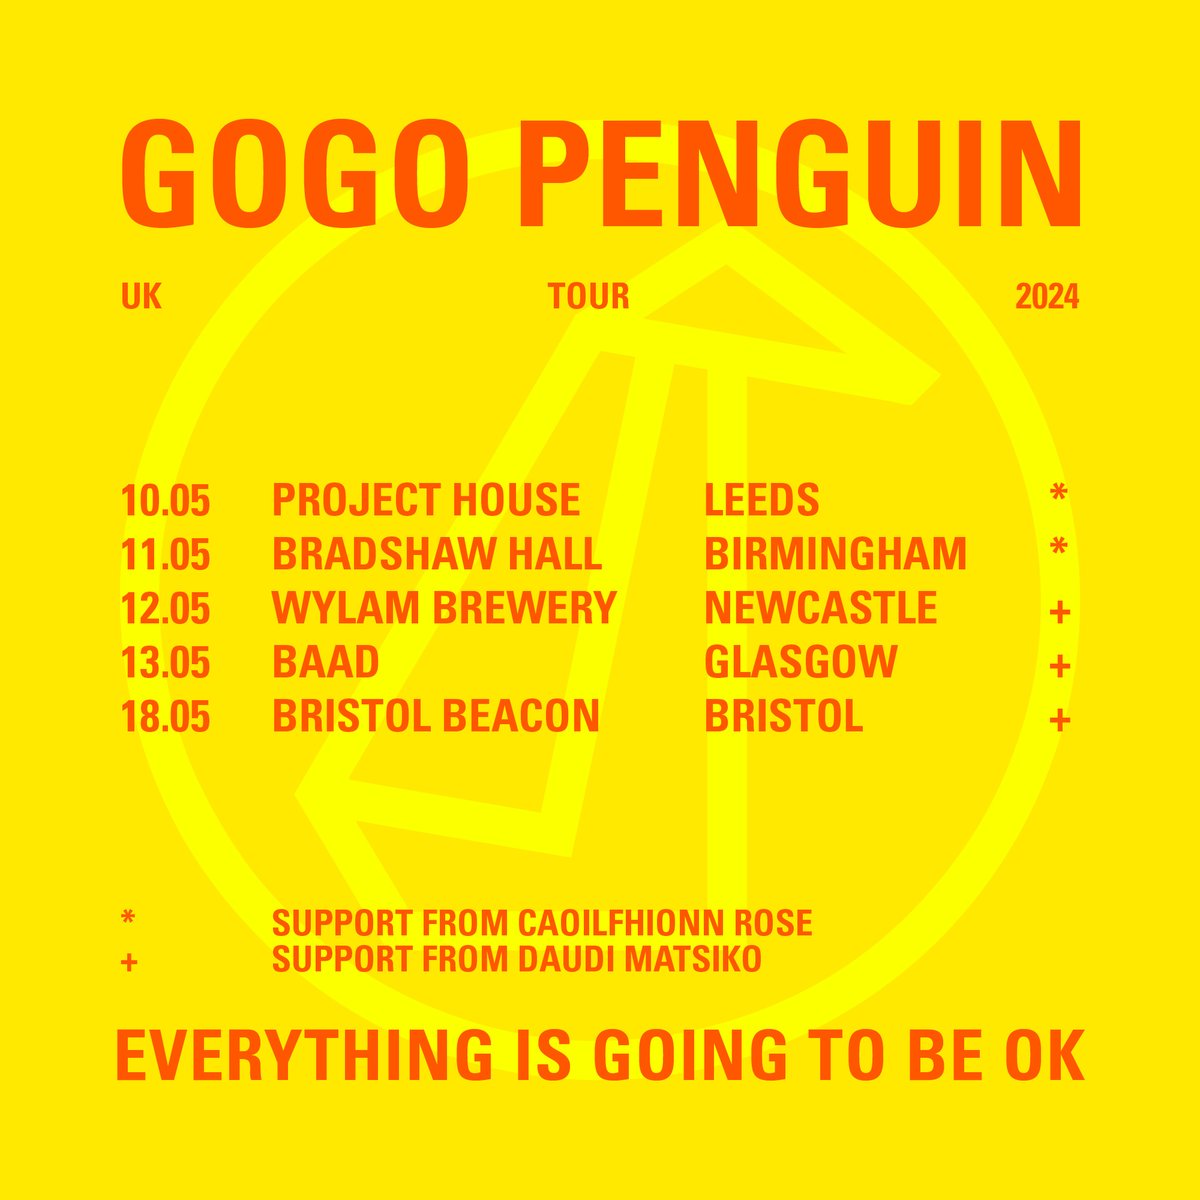 Less than a month to go until our UK tour starts in Leeds! We're joined by our good friend @hellodaudi and Manchester-based singer-songwriter @keelinmusic as support on these dates. GGP x Tickets 👉 gogopenguin.co.uk